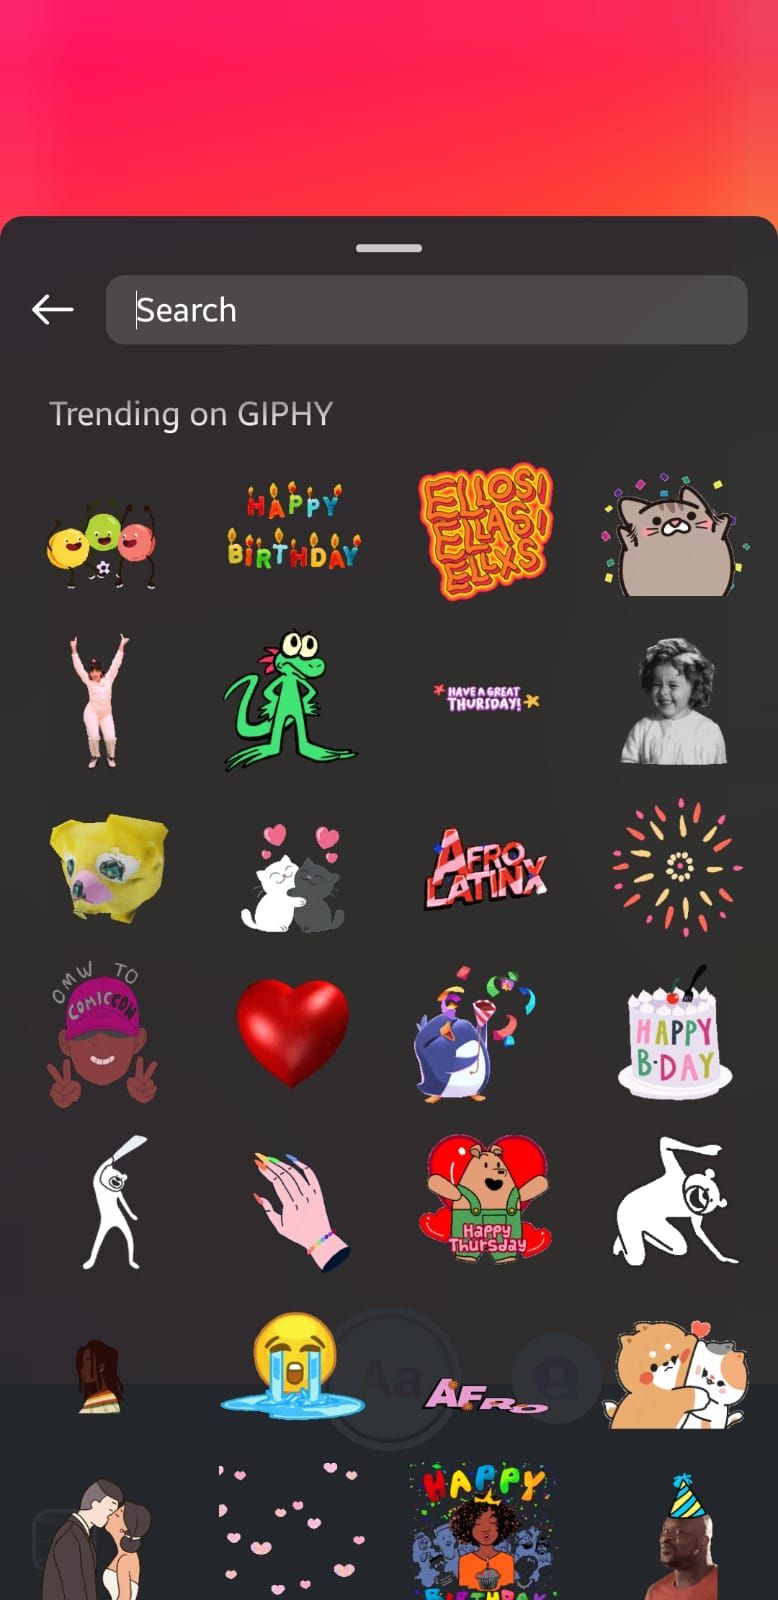 GIF stickers